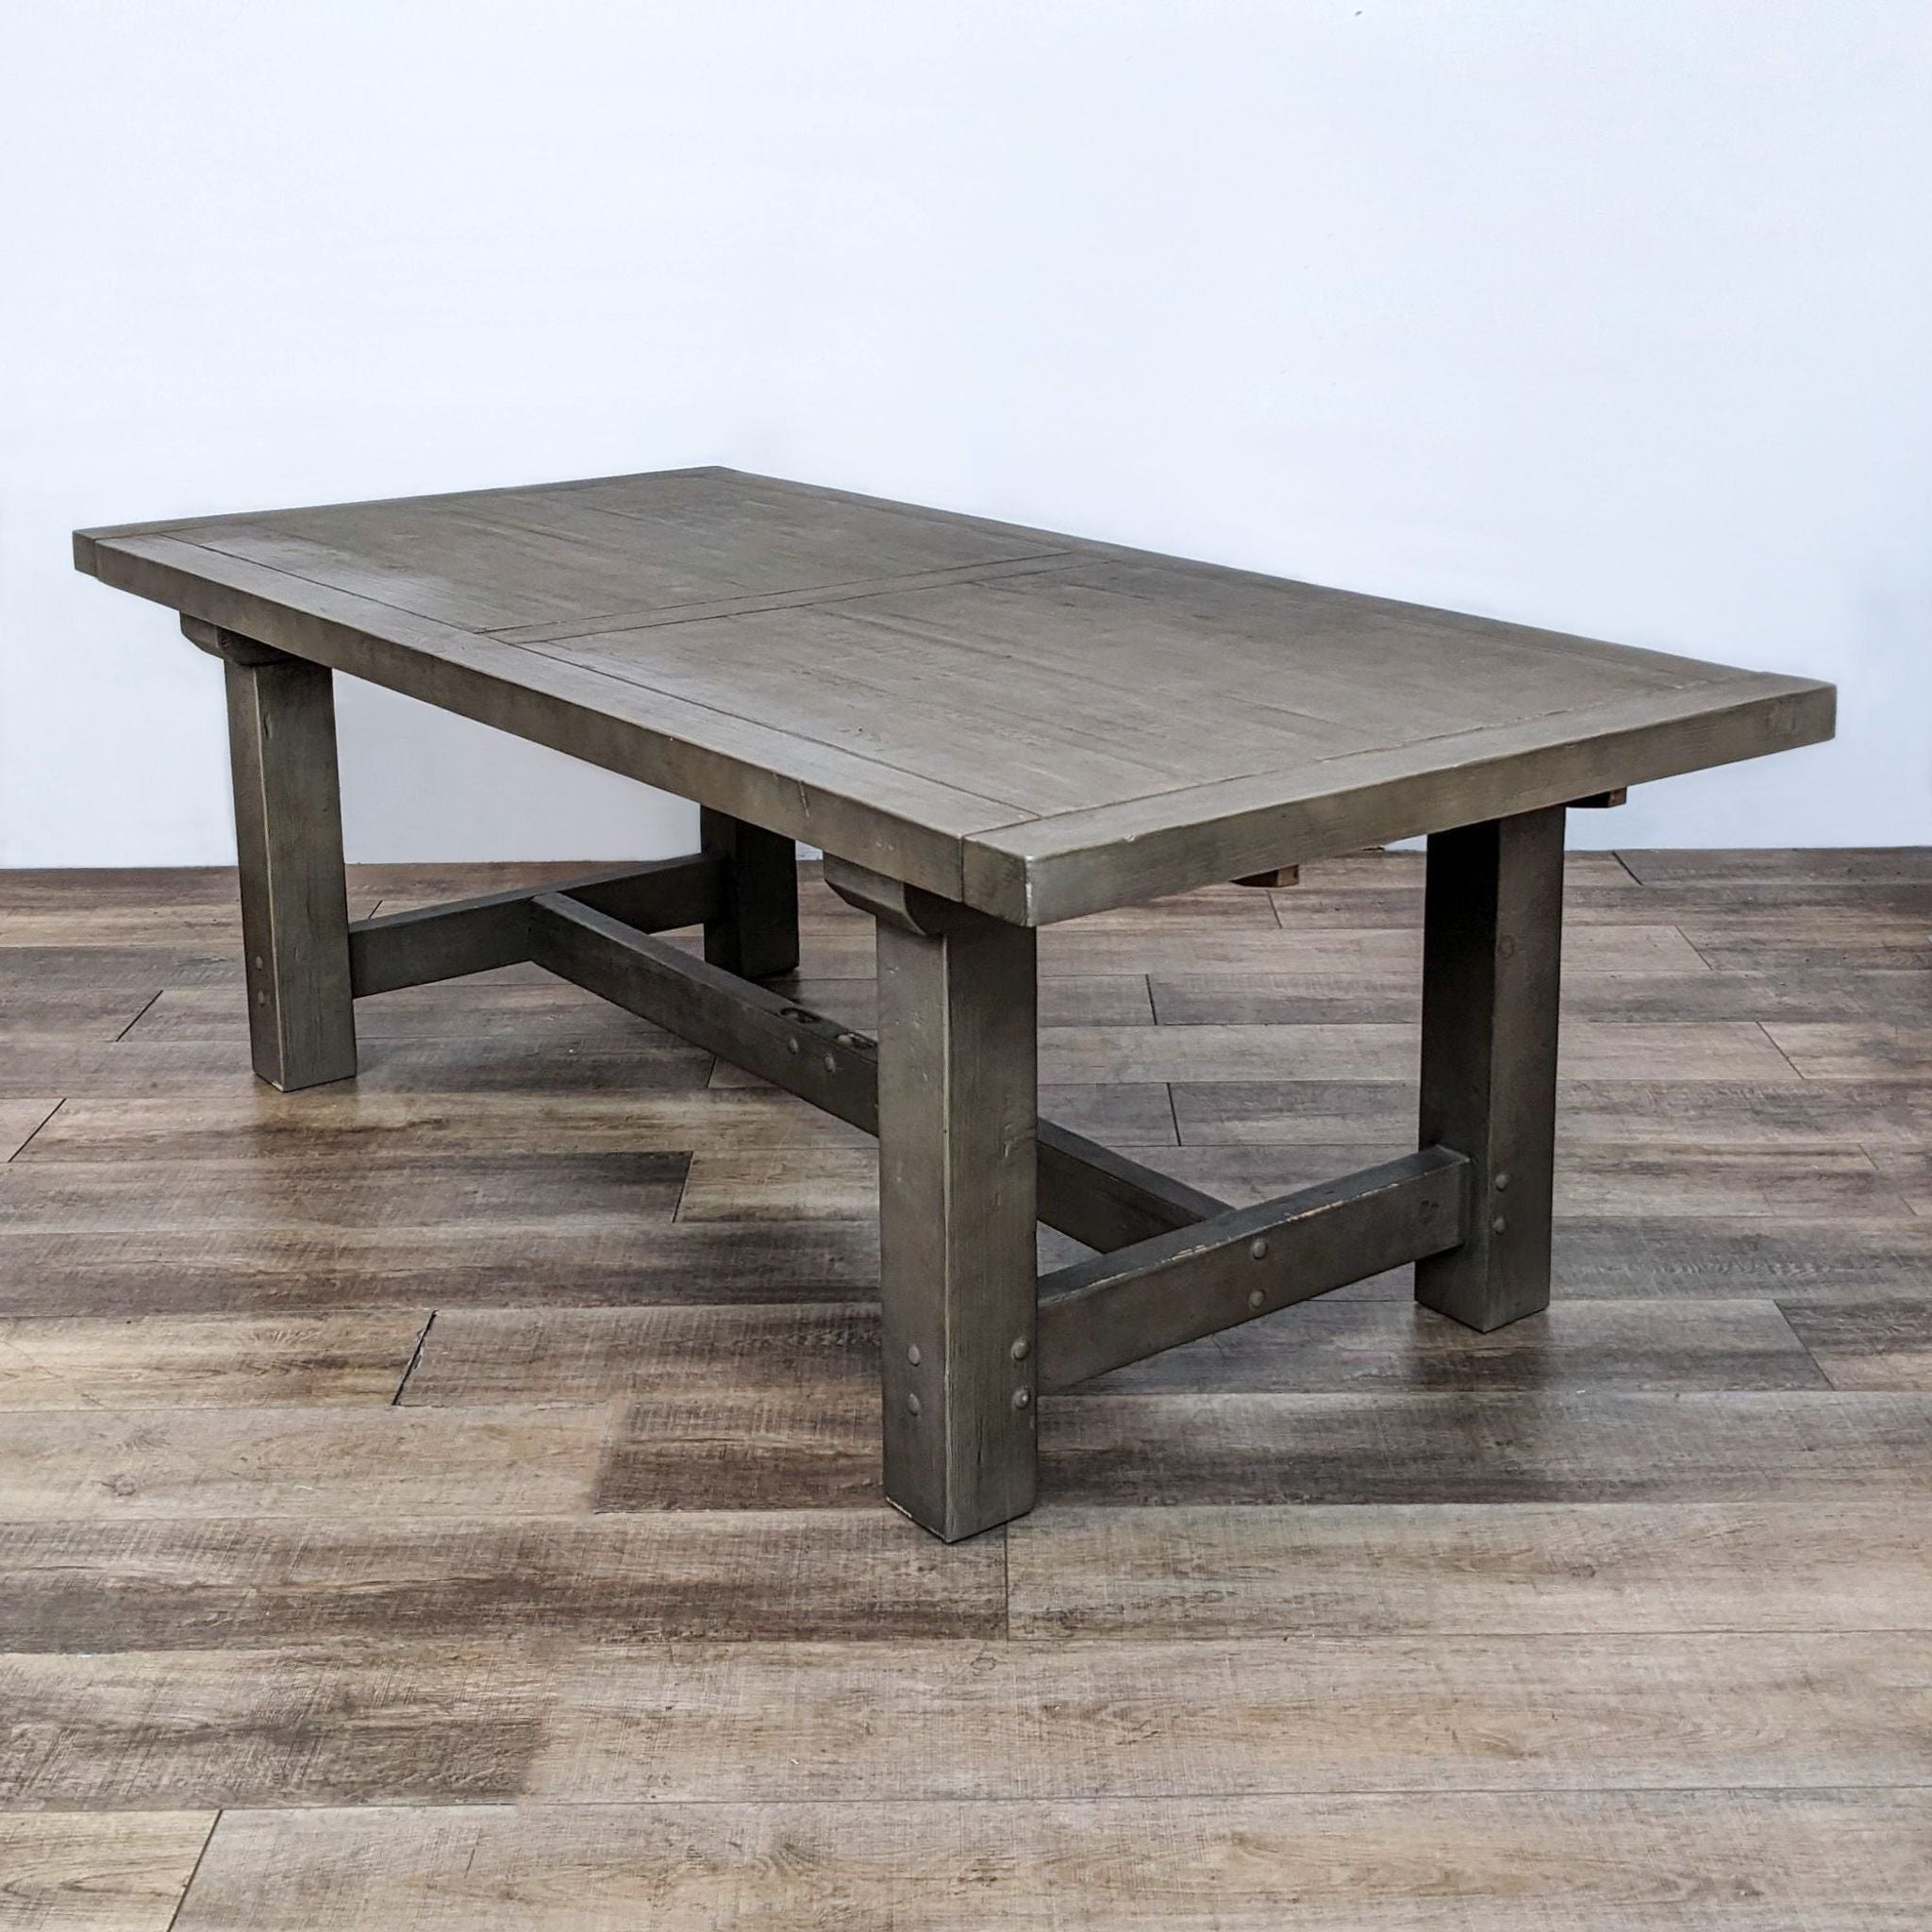 Reperch farmhouse style dining table made of wood and veneer with a trestle base, shown on a wooden floor.